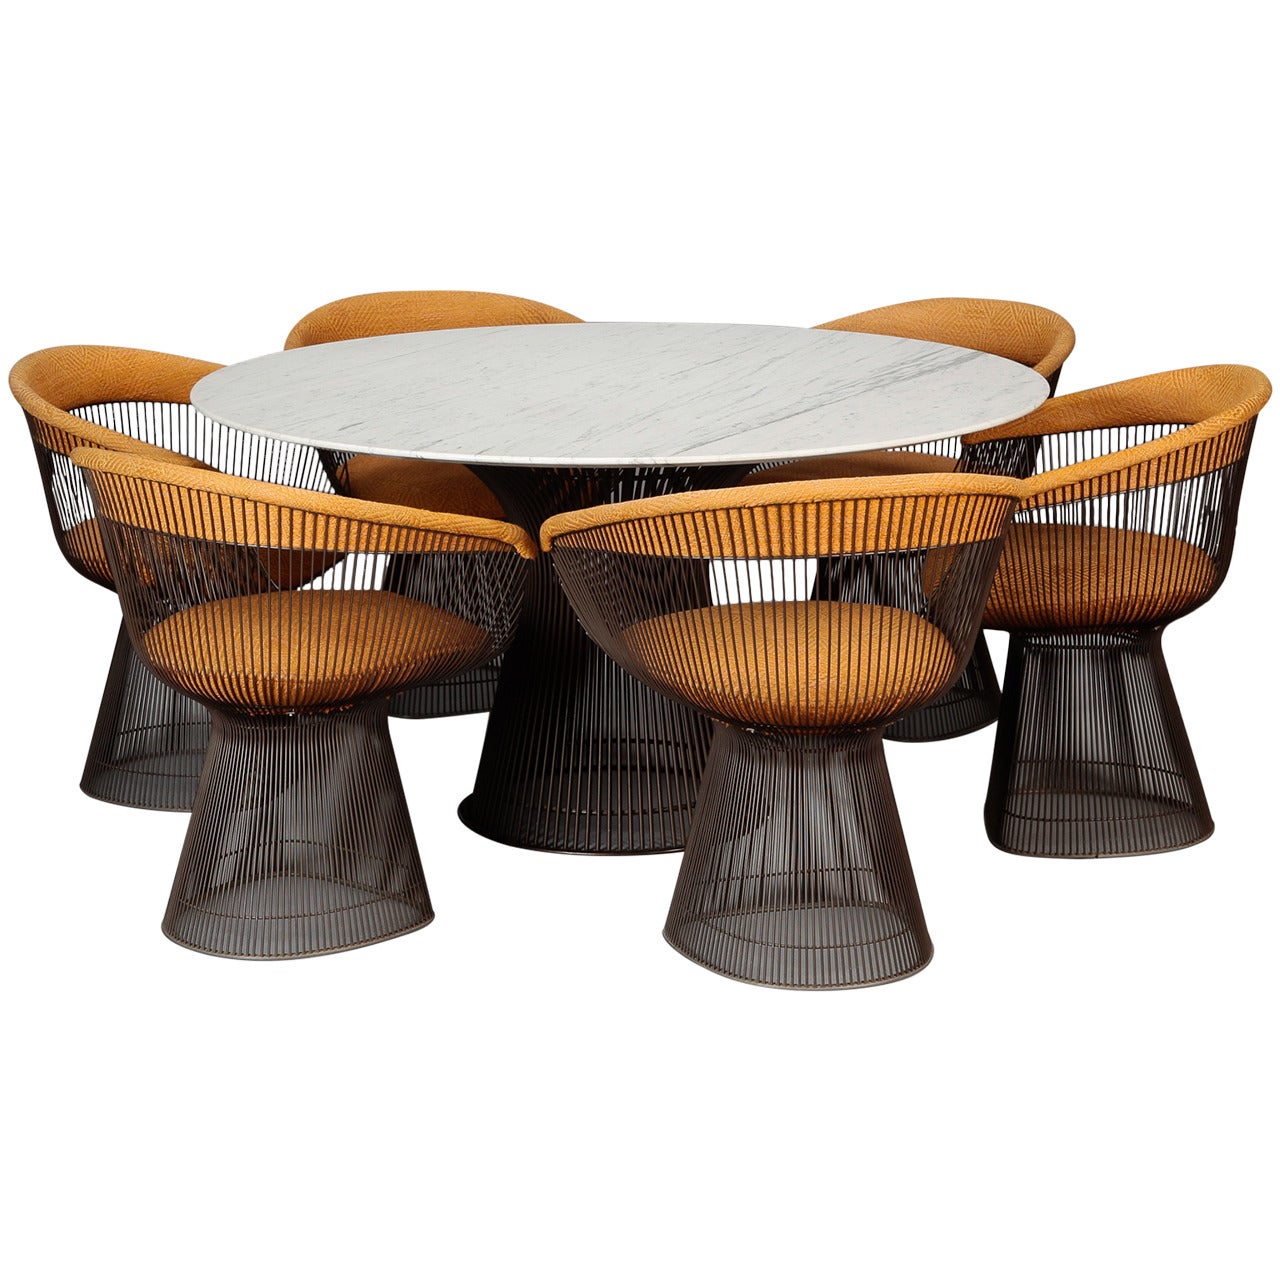 Warren Platner for Knoll Bronze Finish & Marble Table With Six Chairs